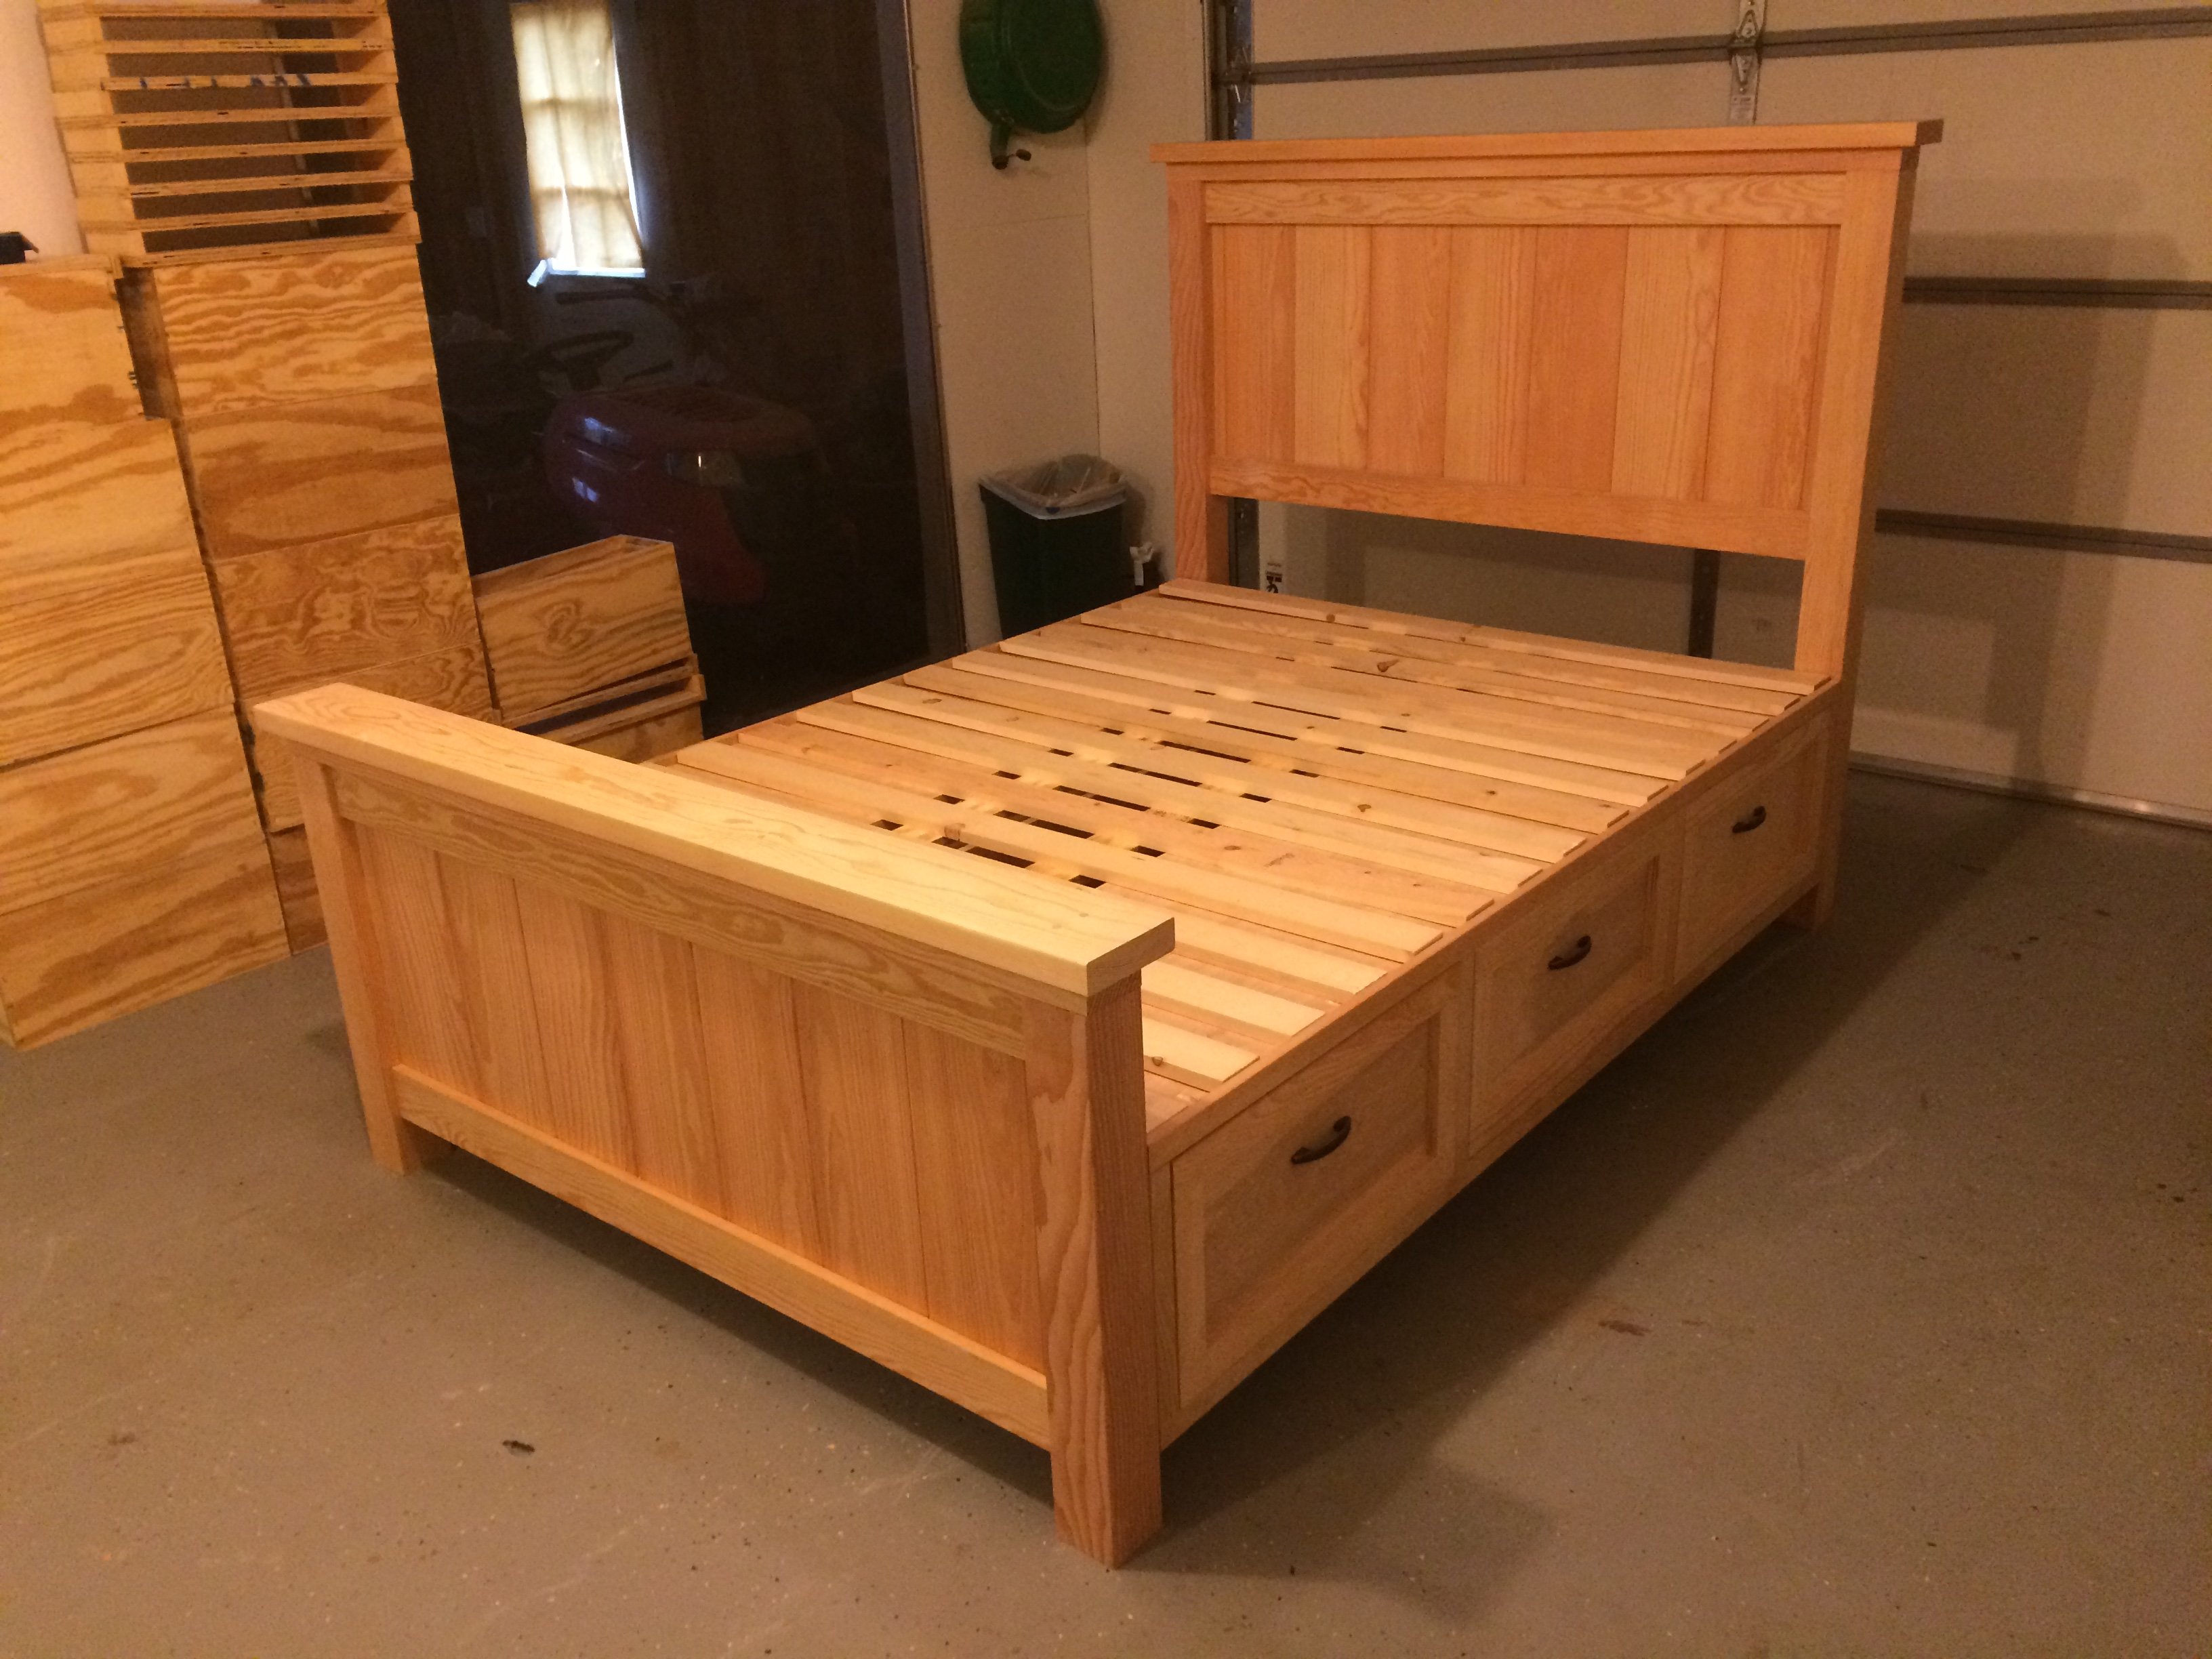 Farmhouse Storage Bed With Drawers, Storage Bed Frame Ideas